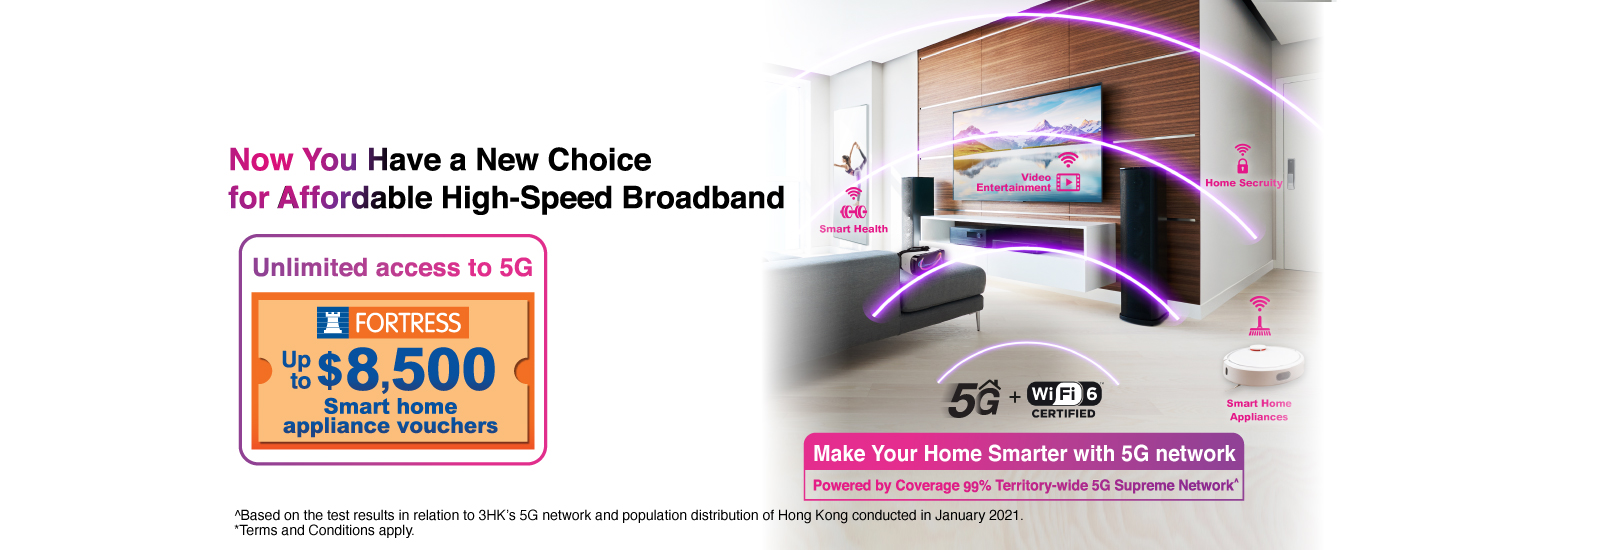 New 5G Broadband with Fortress Smart Home Appliances Voucher Plan from $444. Enjoy Unlimited 5G Broadband at Home & Office!